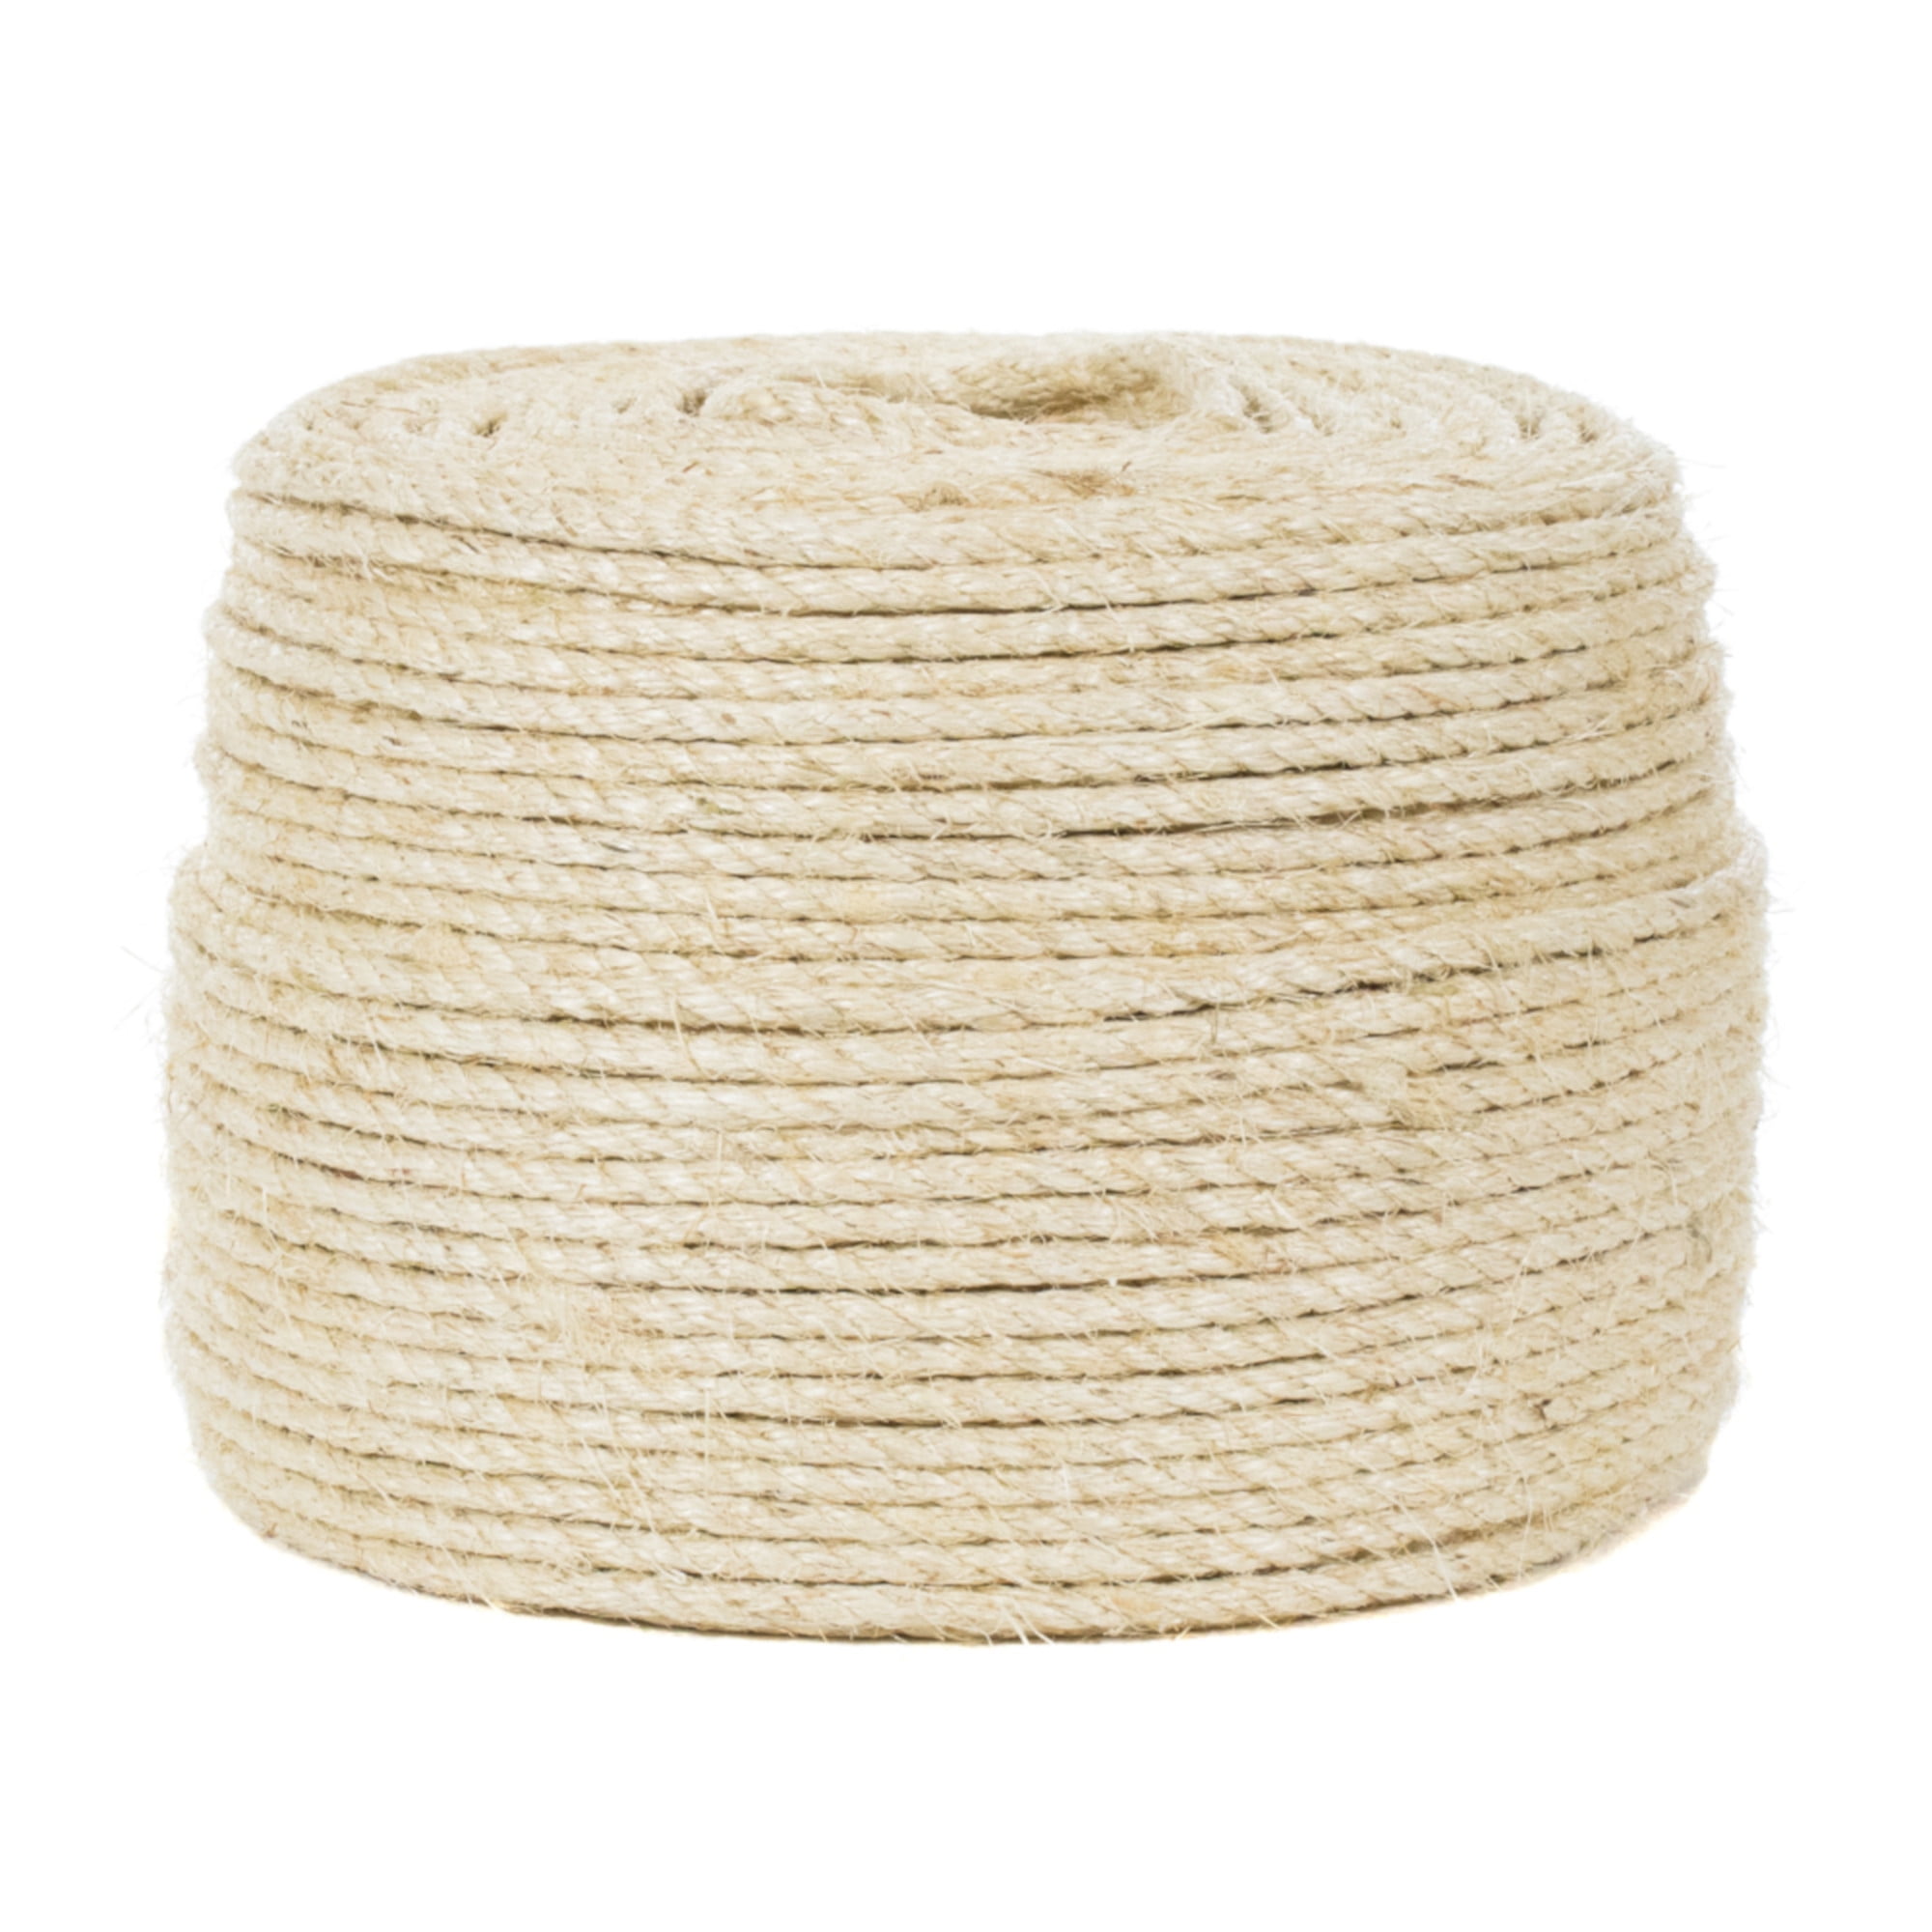 Golberg Twisted Sisal Rope Available in 1/4, 5/16, 3/8, 1/2, 3/4, and  1-inch Diameters in Various Lengths 